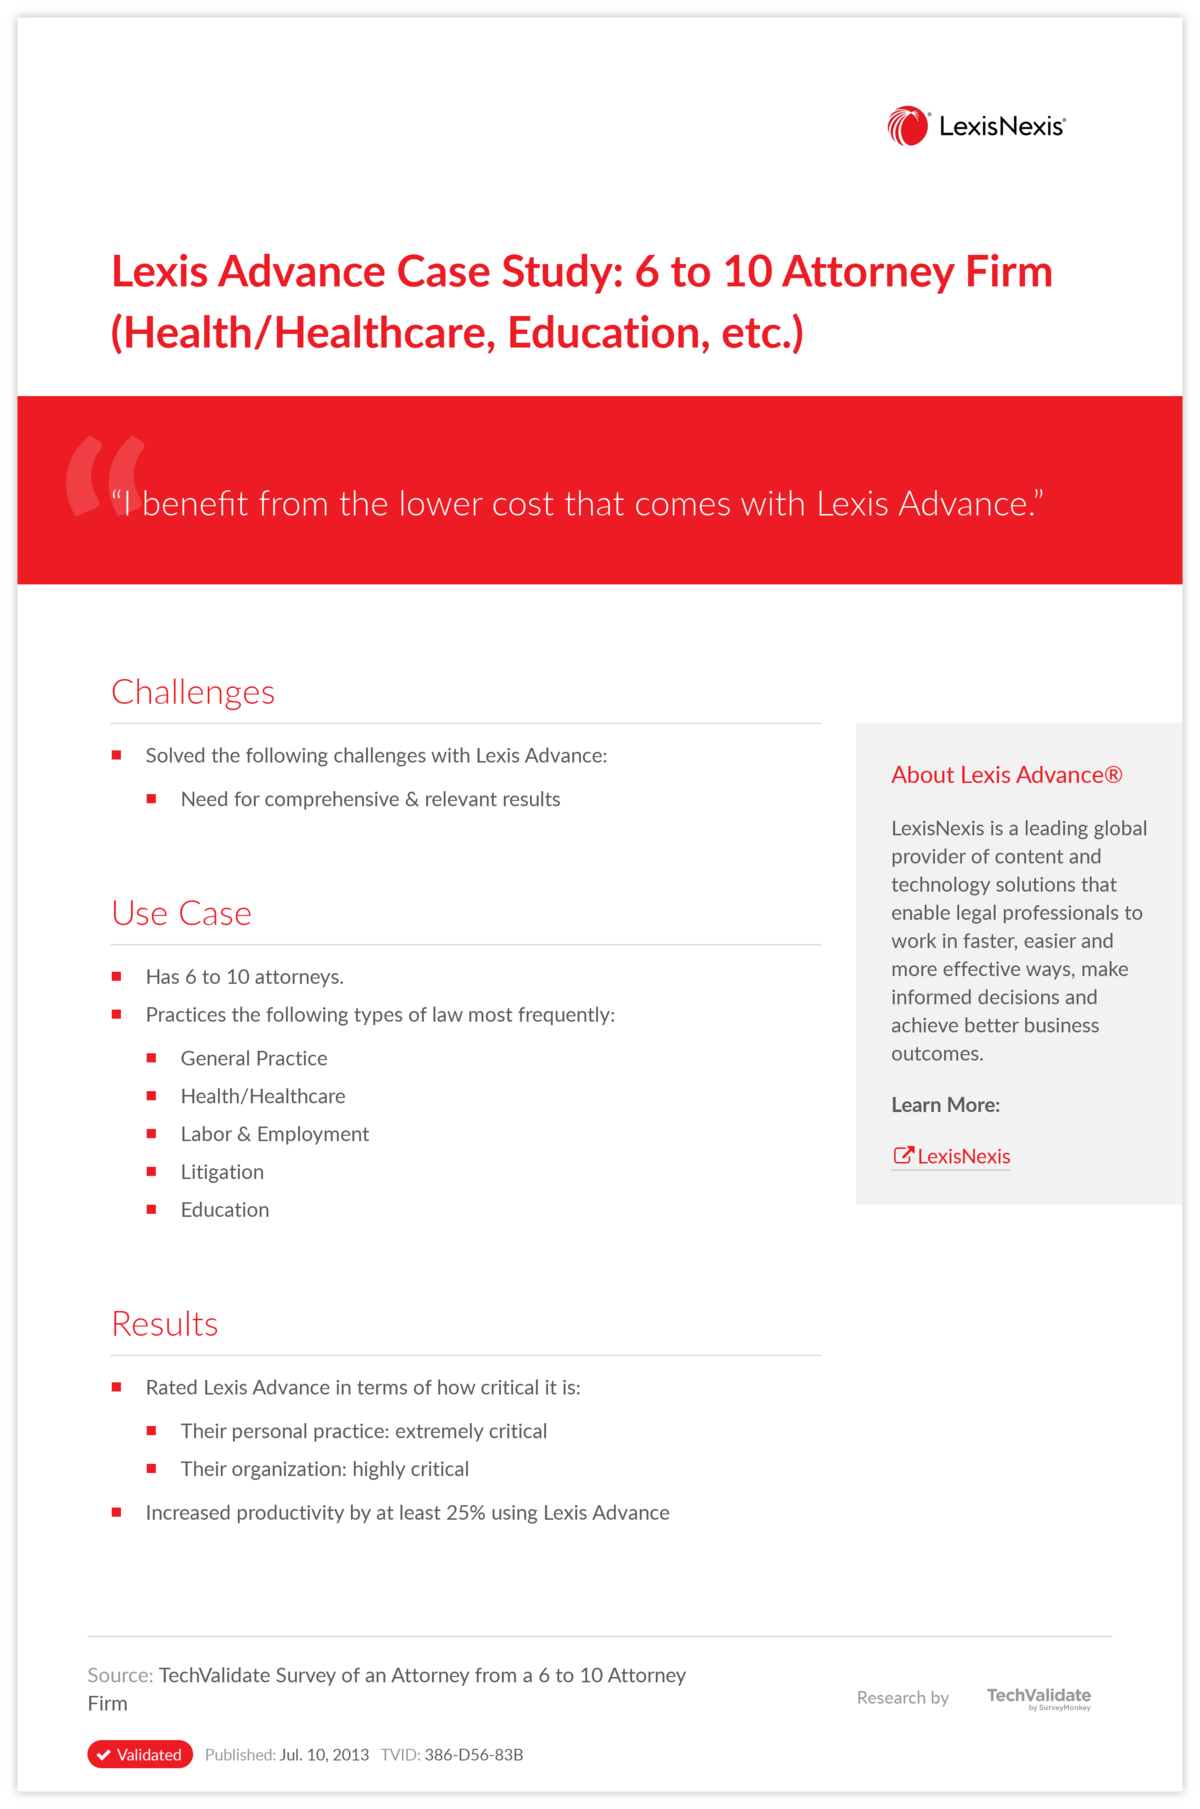 Lexis Advance Case Study: 6 to 10 Attorney Firm (Health/Healthcare, Education, etc.)